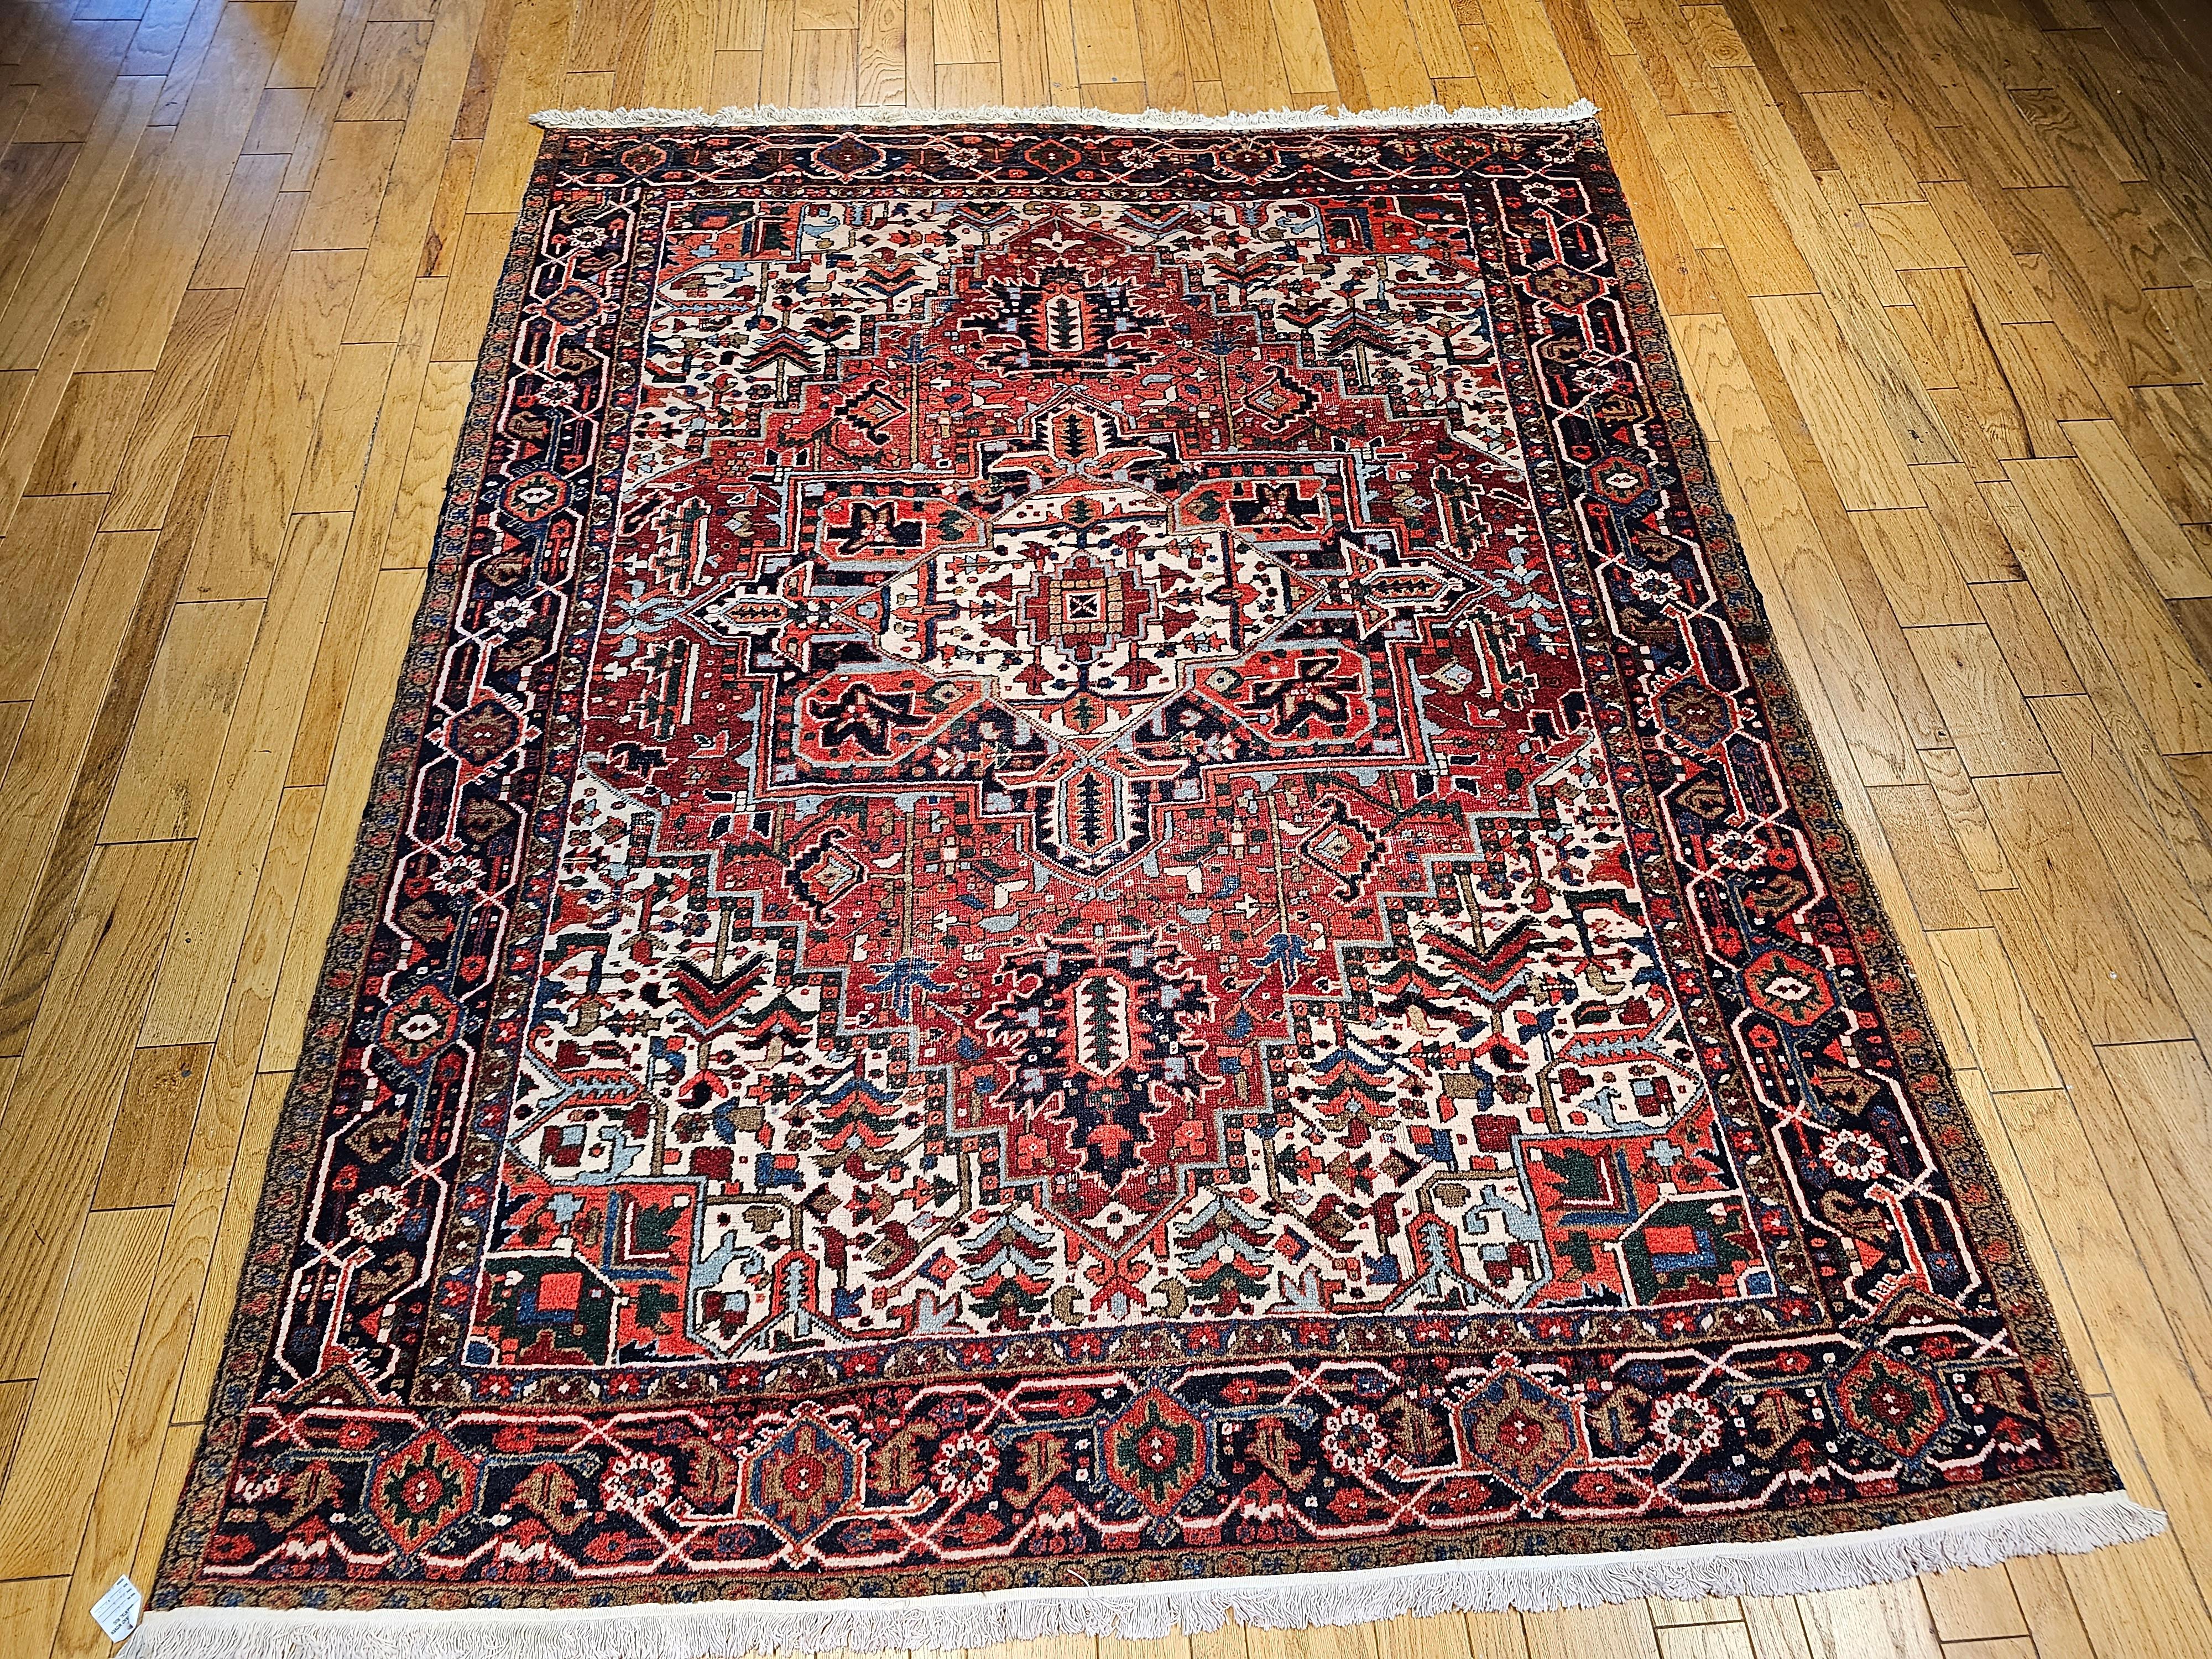 Beautiful and very colorful vintage Persian Heriz room size rug from the first quarter of the 20th century.  The field is a dark red or a brick red color with the central medallion in white with the medallion corners in blue and red with accent